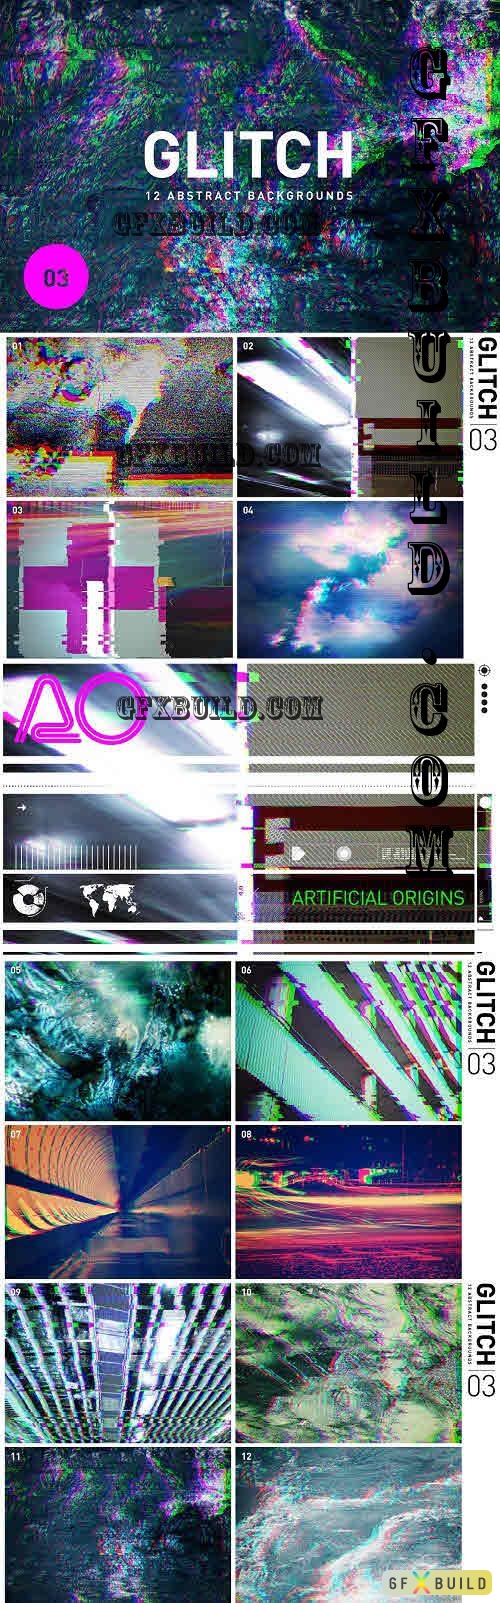 Glitch 03 - 12 Abstract Backgrounds - 10186109